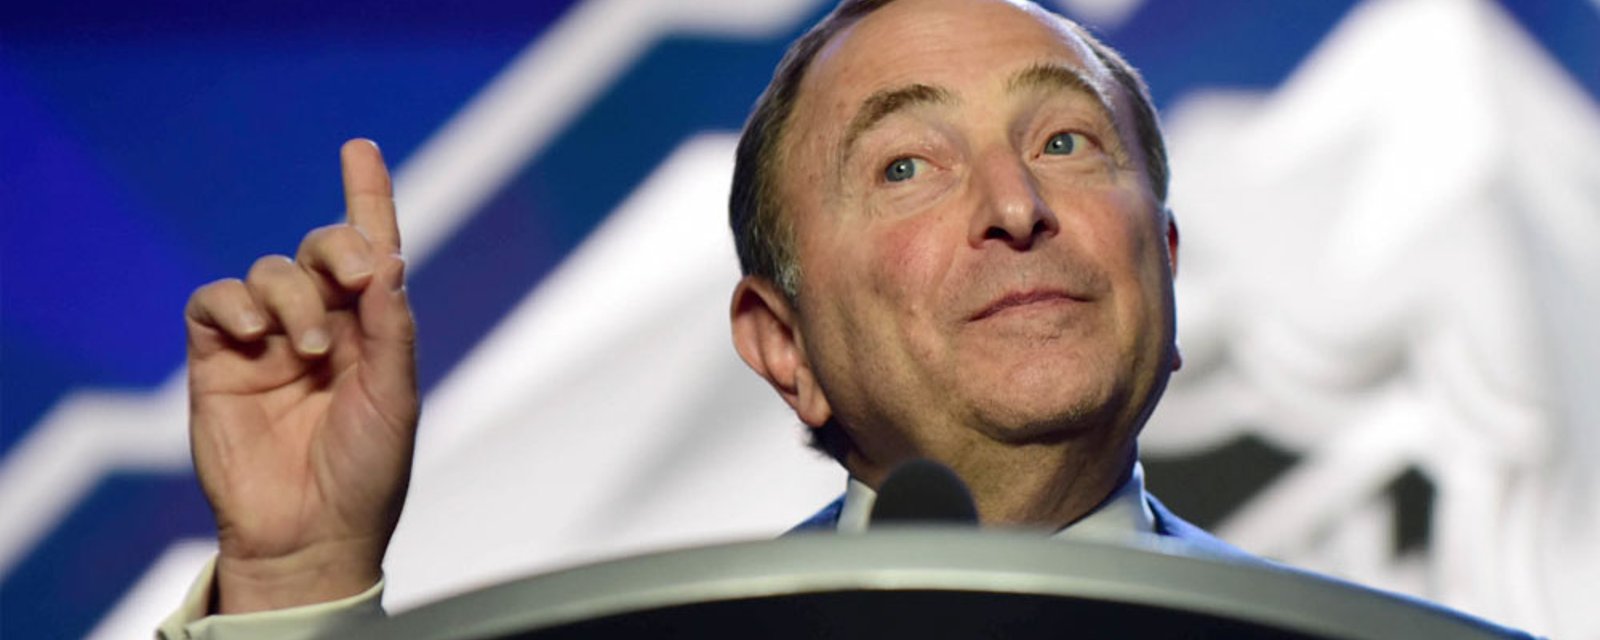 Agent slams Bettman, uncovers reasons behind lack of Olympic participation for NHLers